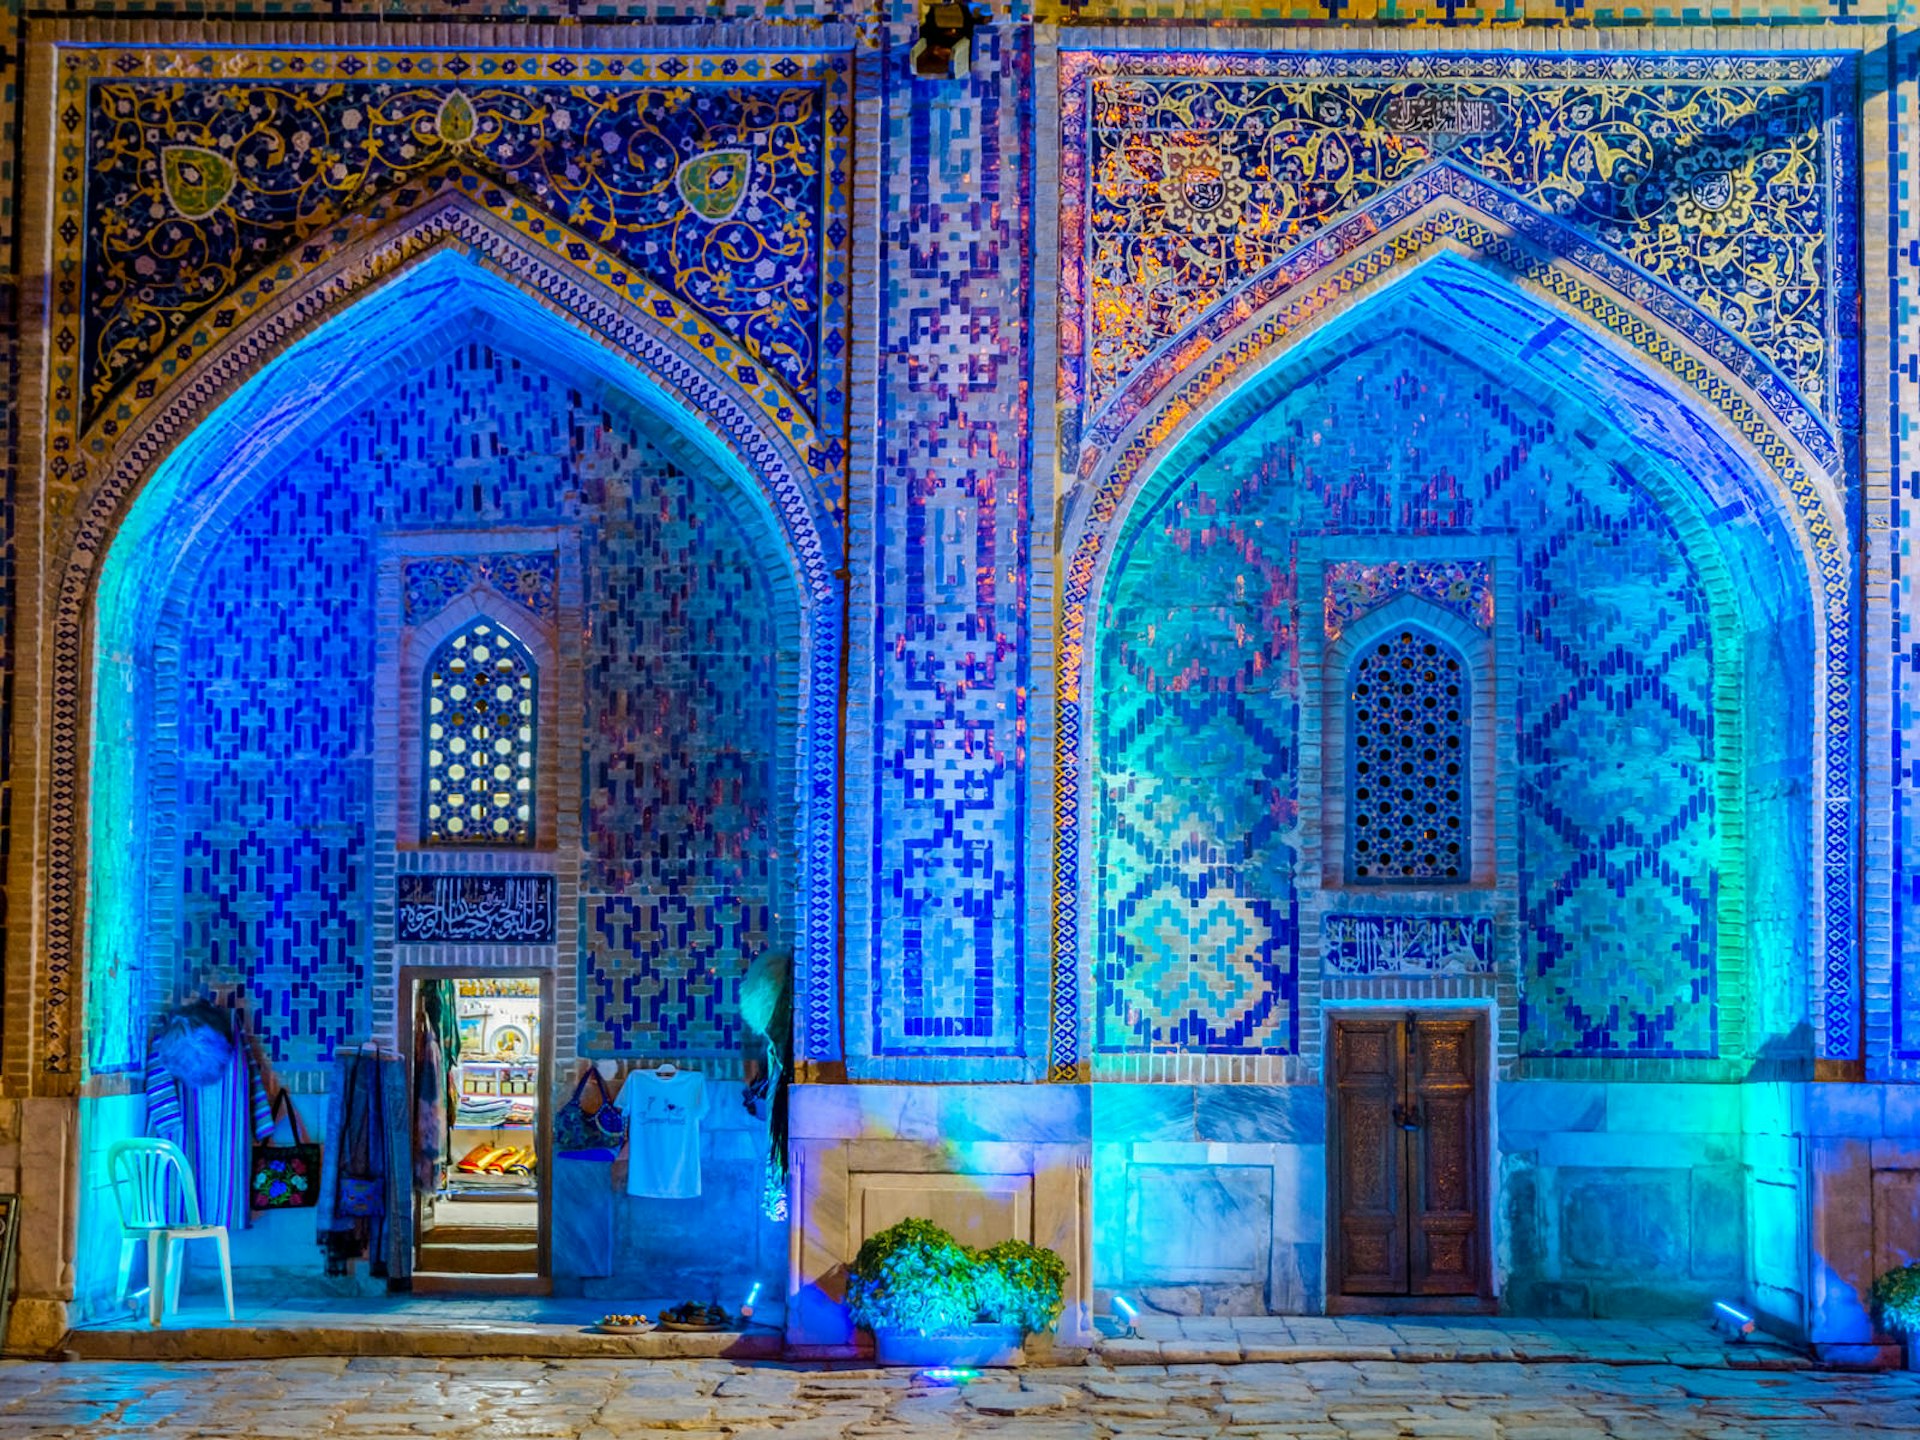 Two blue tiled arches are illuminated with glowing blue and green lights. Shop in lit up at night in the atrium of Sher Dor medressa in Samarkand © Dinozzzaver / Shutterstock